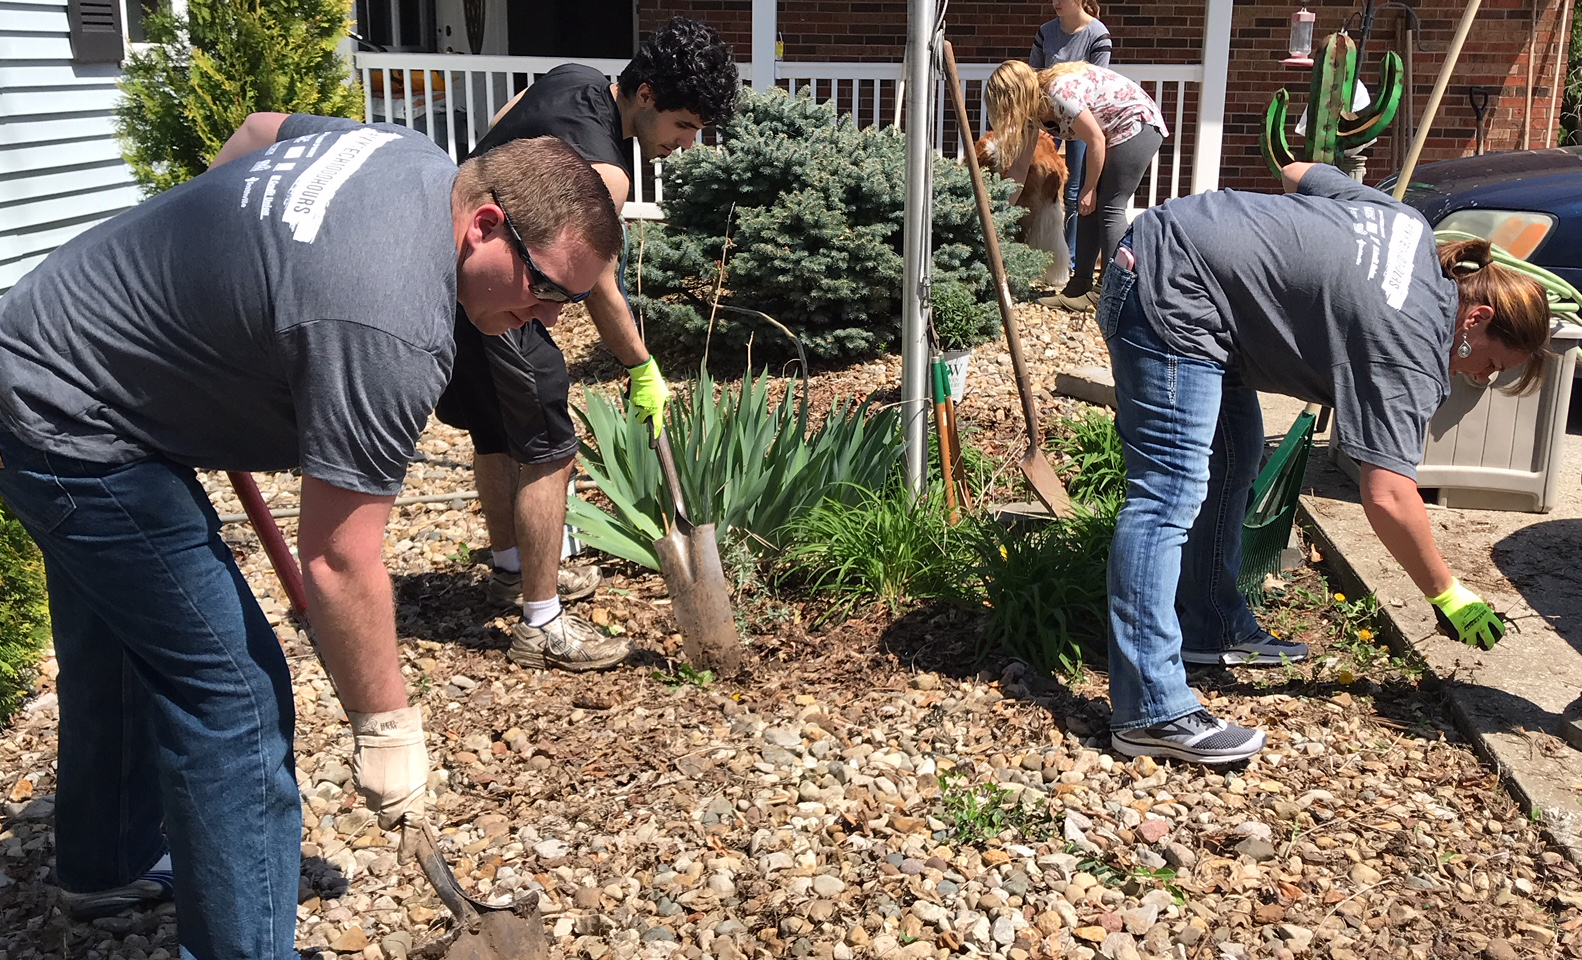 Volunteers in matching shirts use shovels and hand tools to clean up mulch and landscaping at a group home.